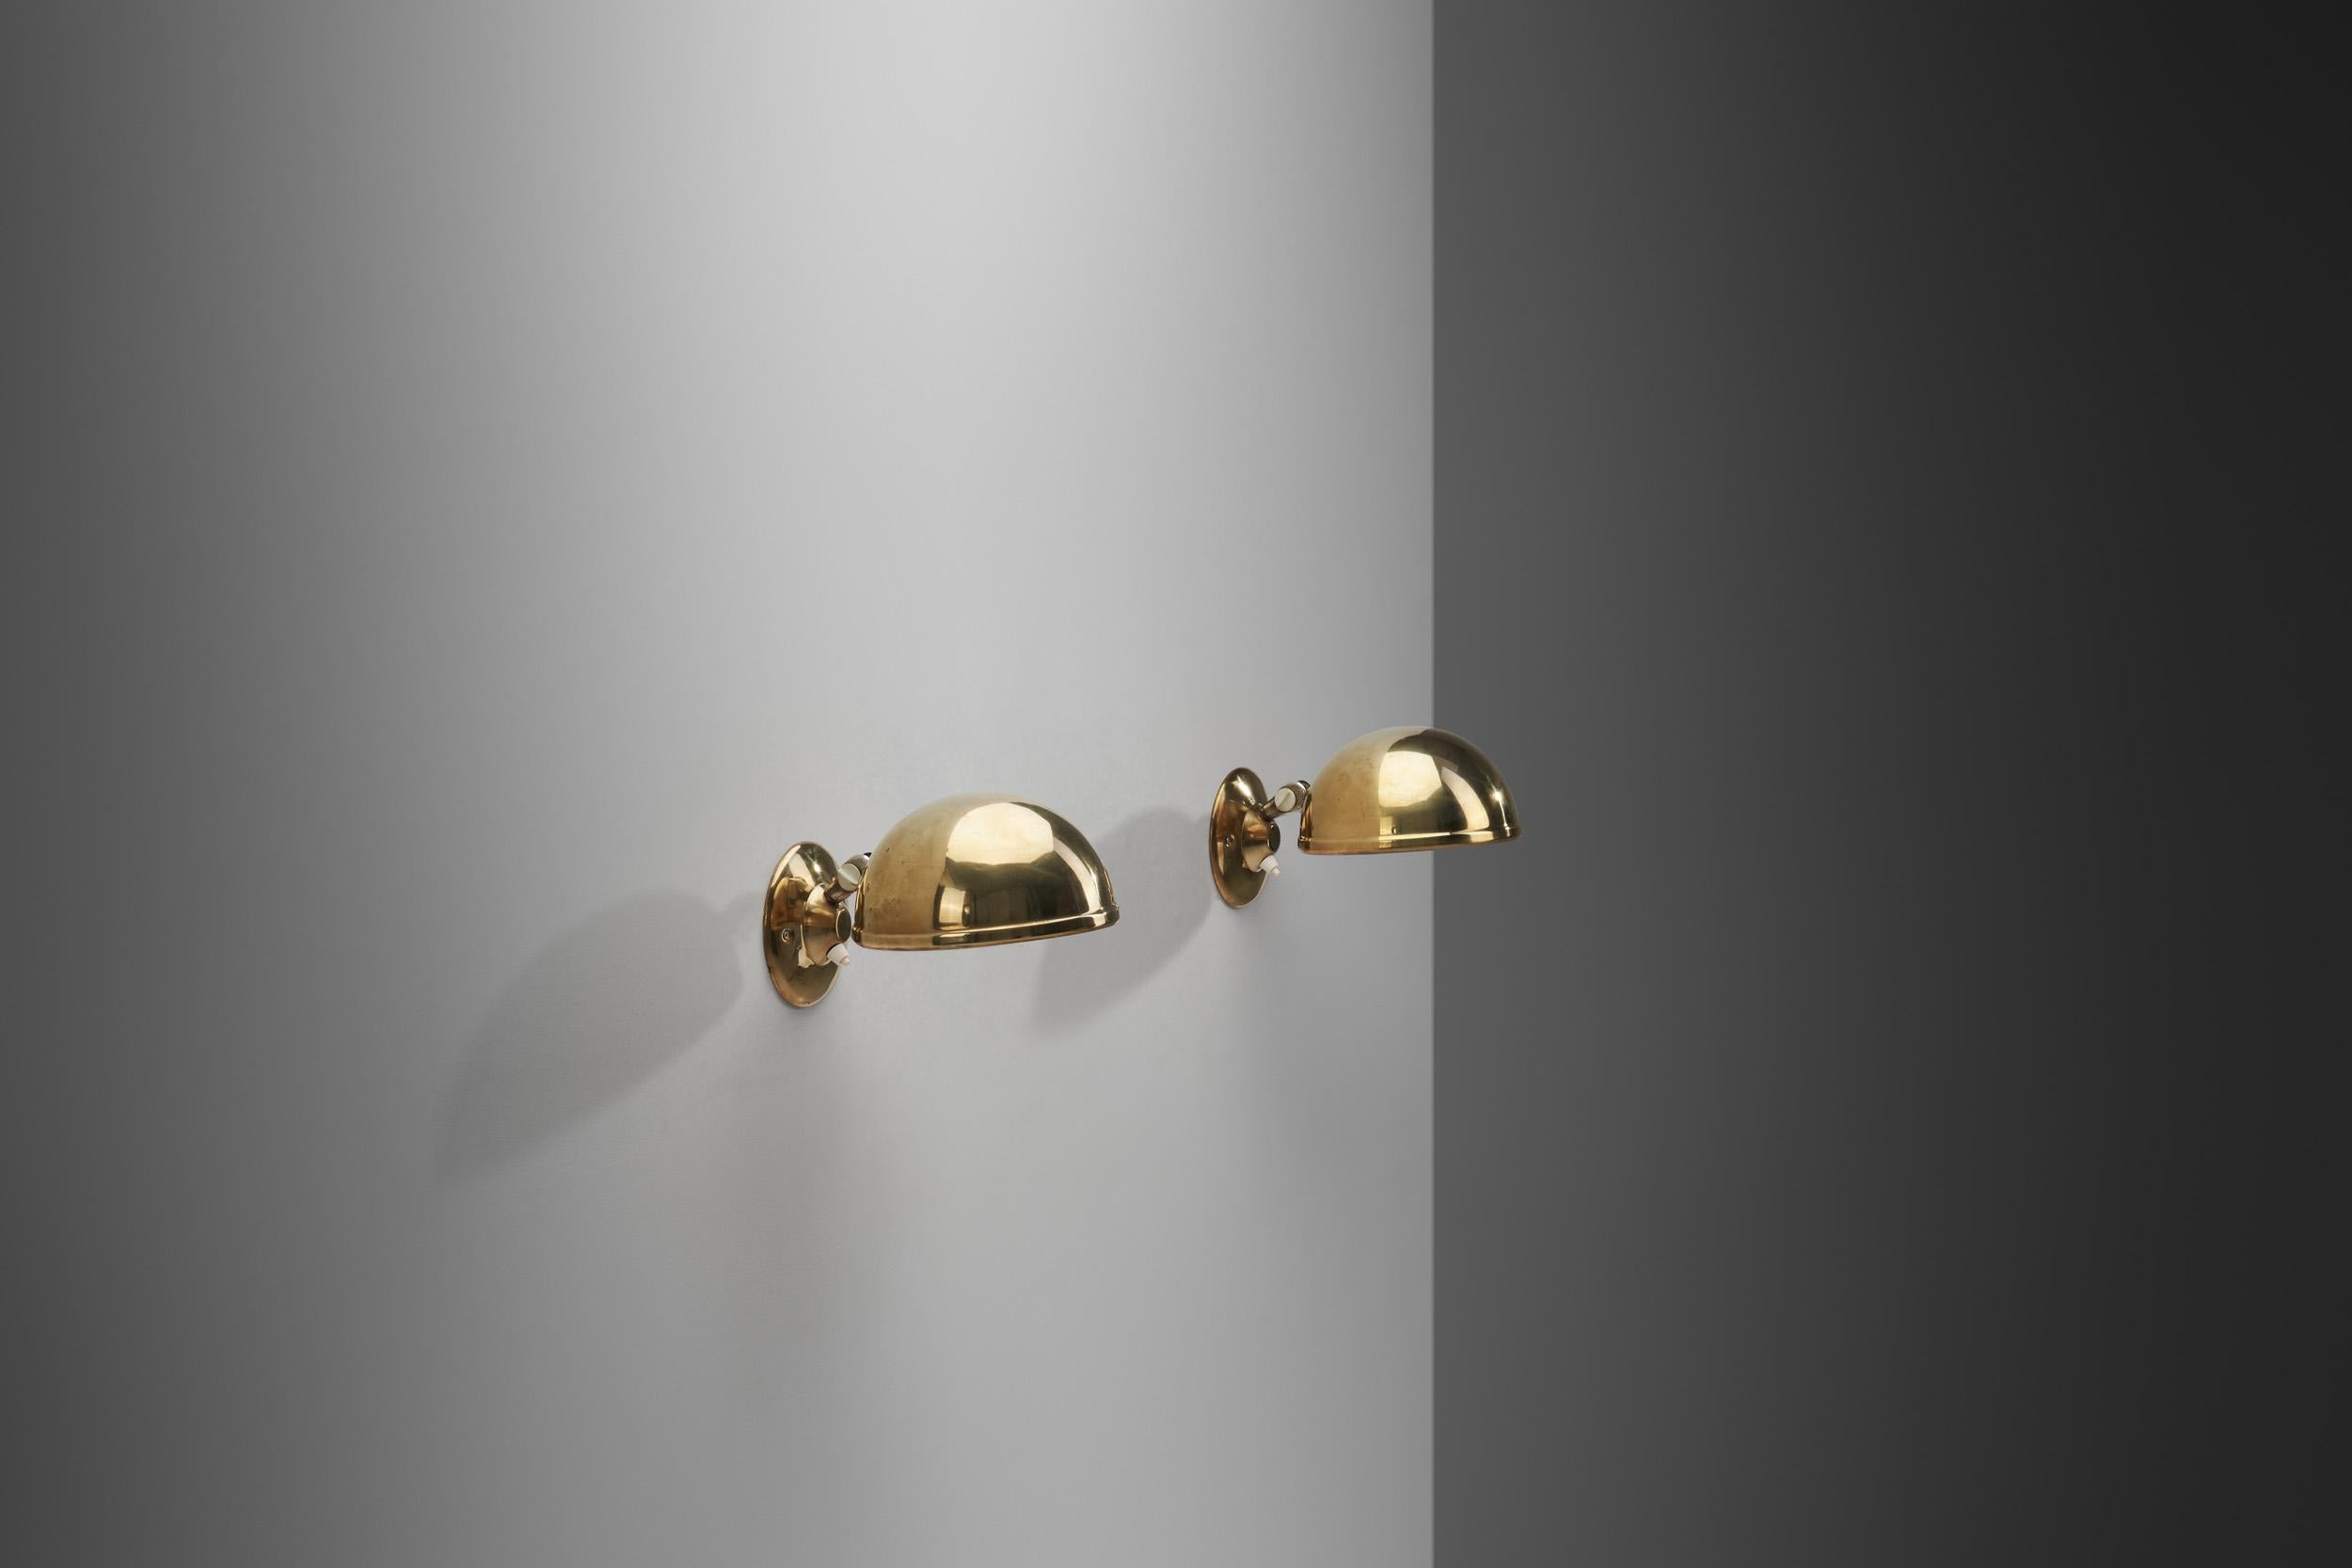 This pair of wall lamps was designed by Knud Christensen in Denmark during the 1970s, an era in which Denmark saw the birth of many of its most iconic lighting models. It was a period of consistency, excellence and sophistication design wise.

The